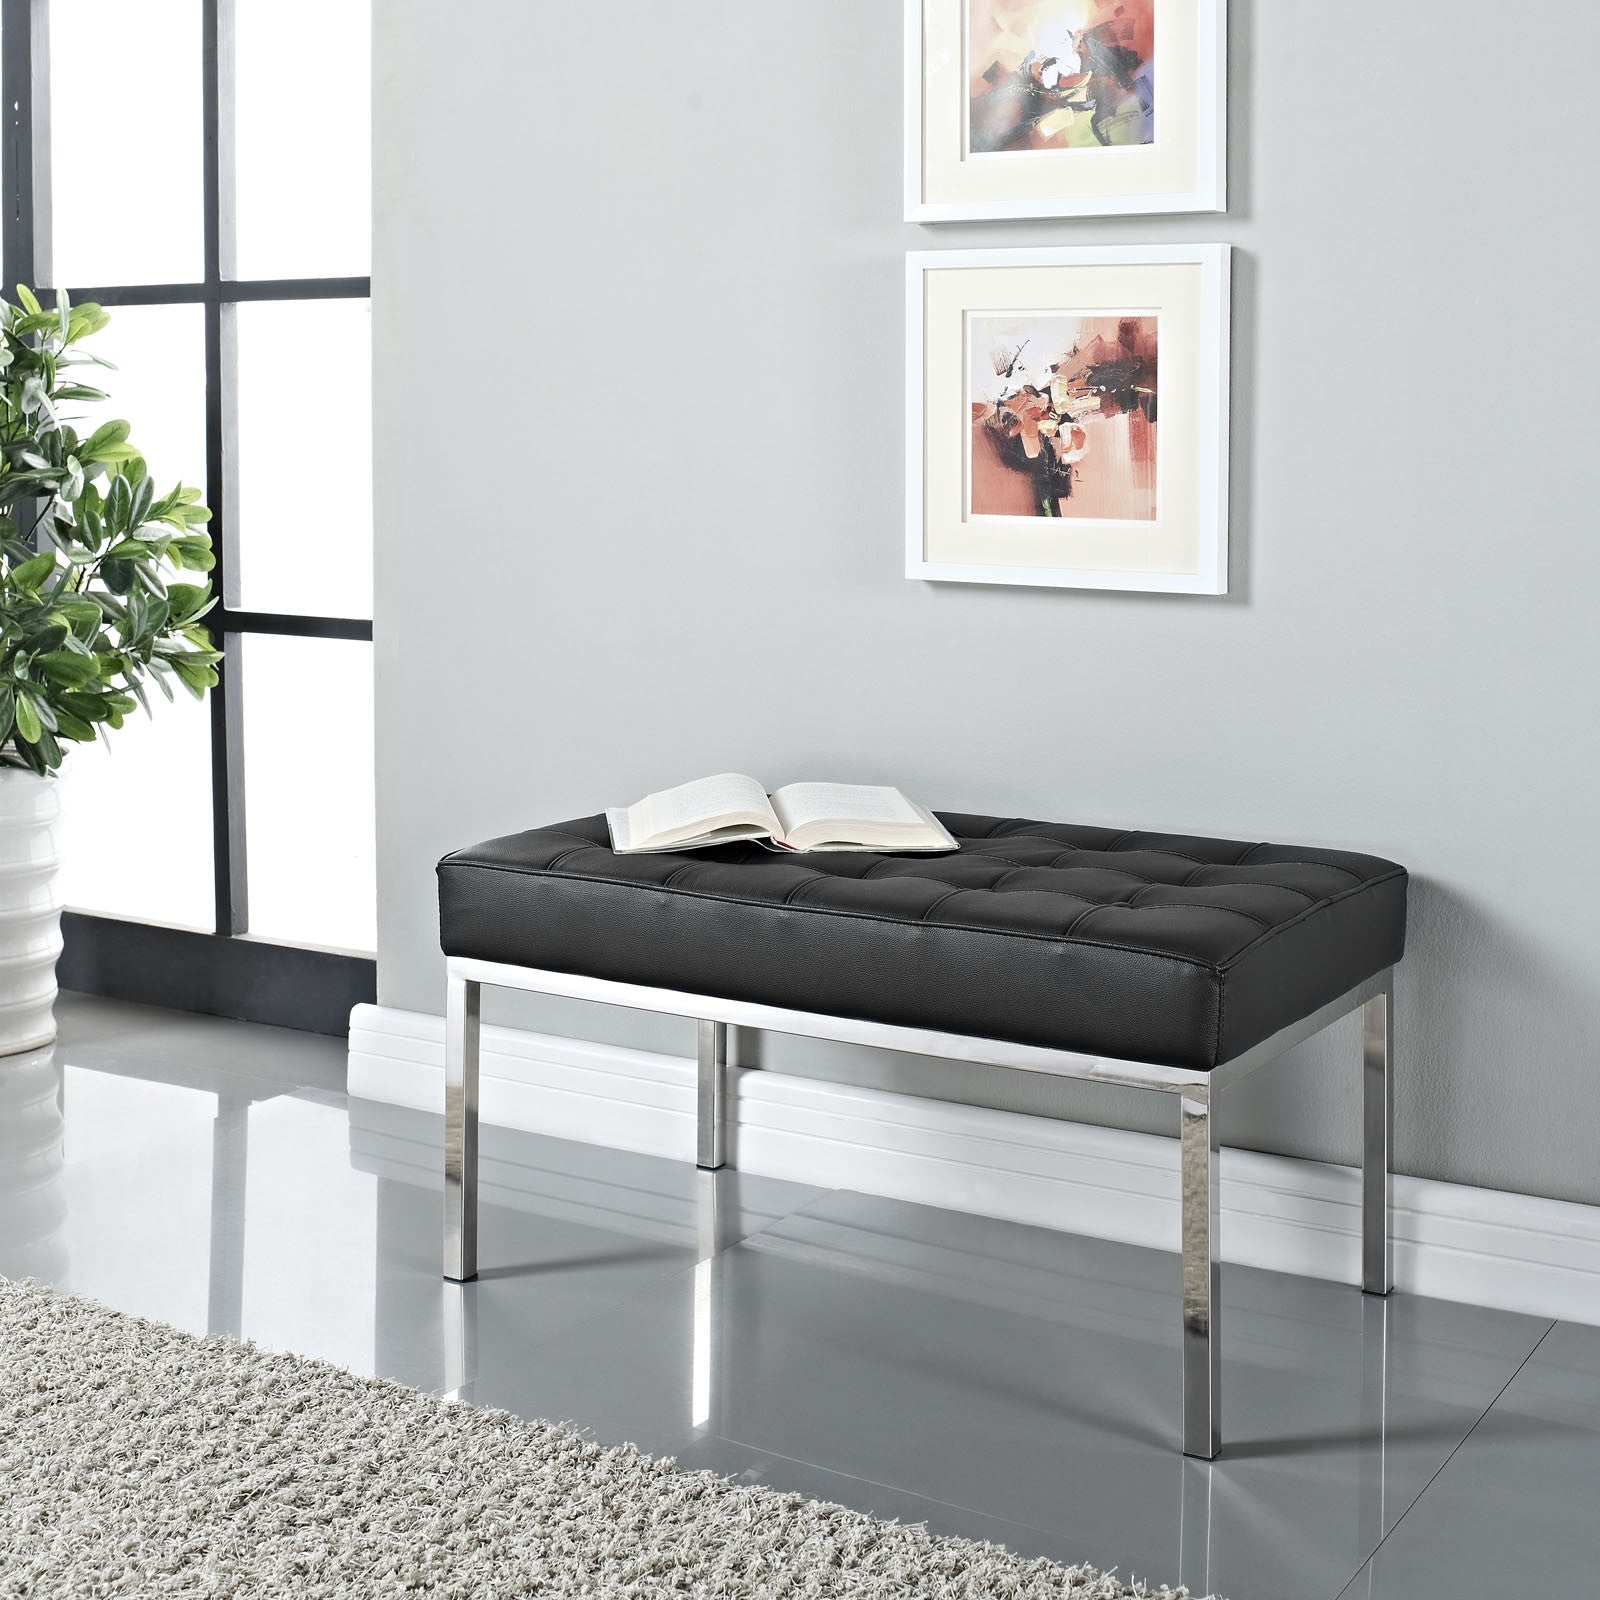 Lyte Two-Seater Bench Black